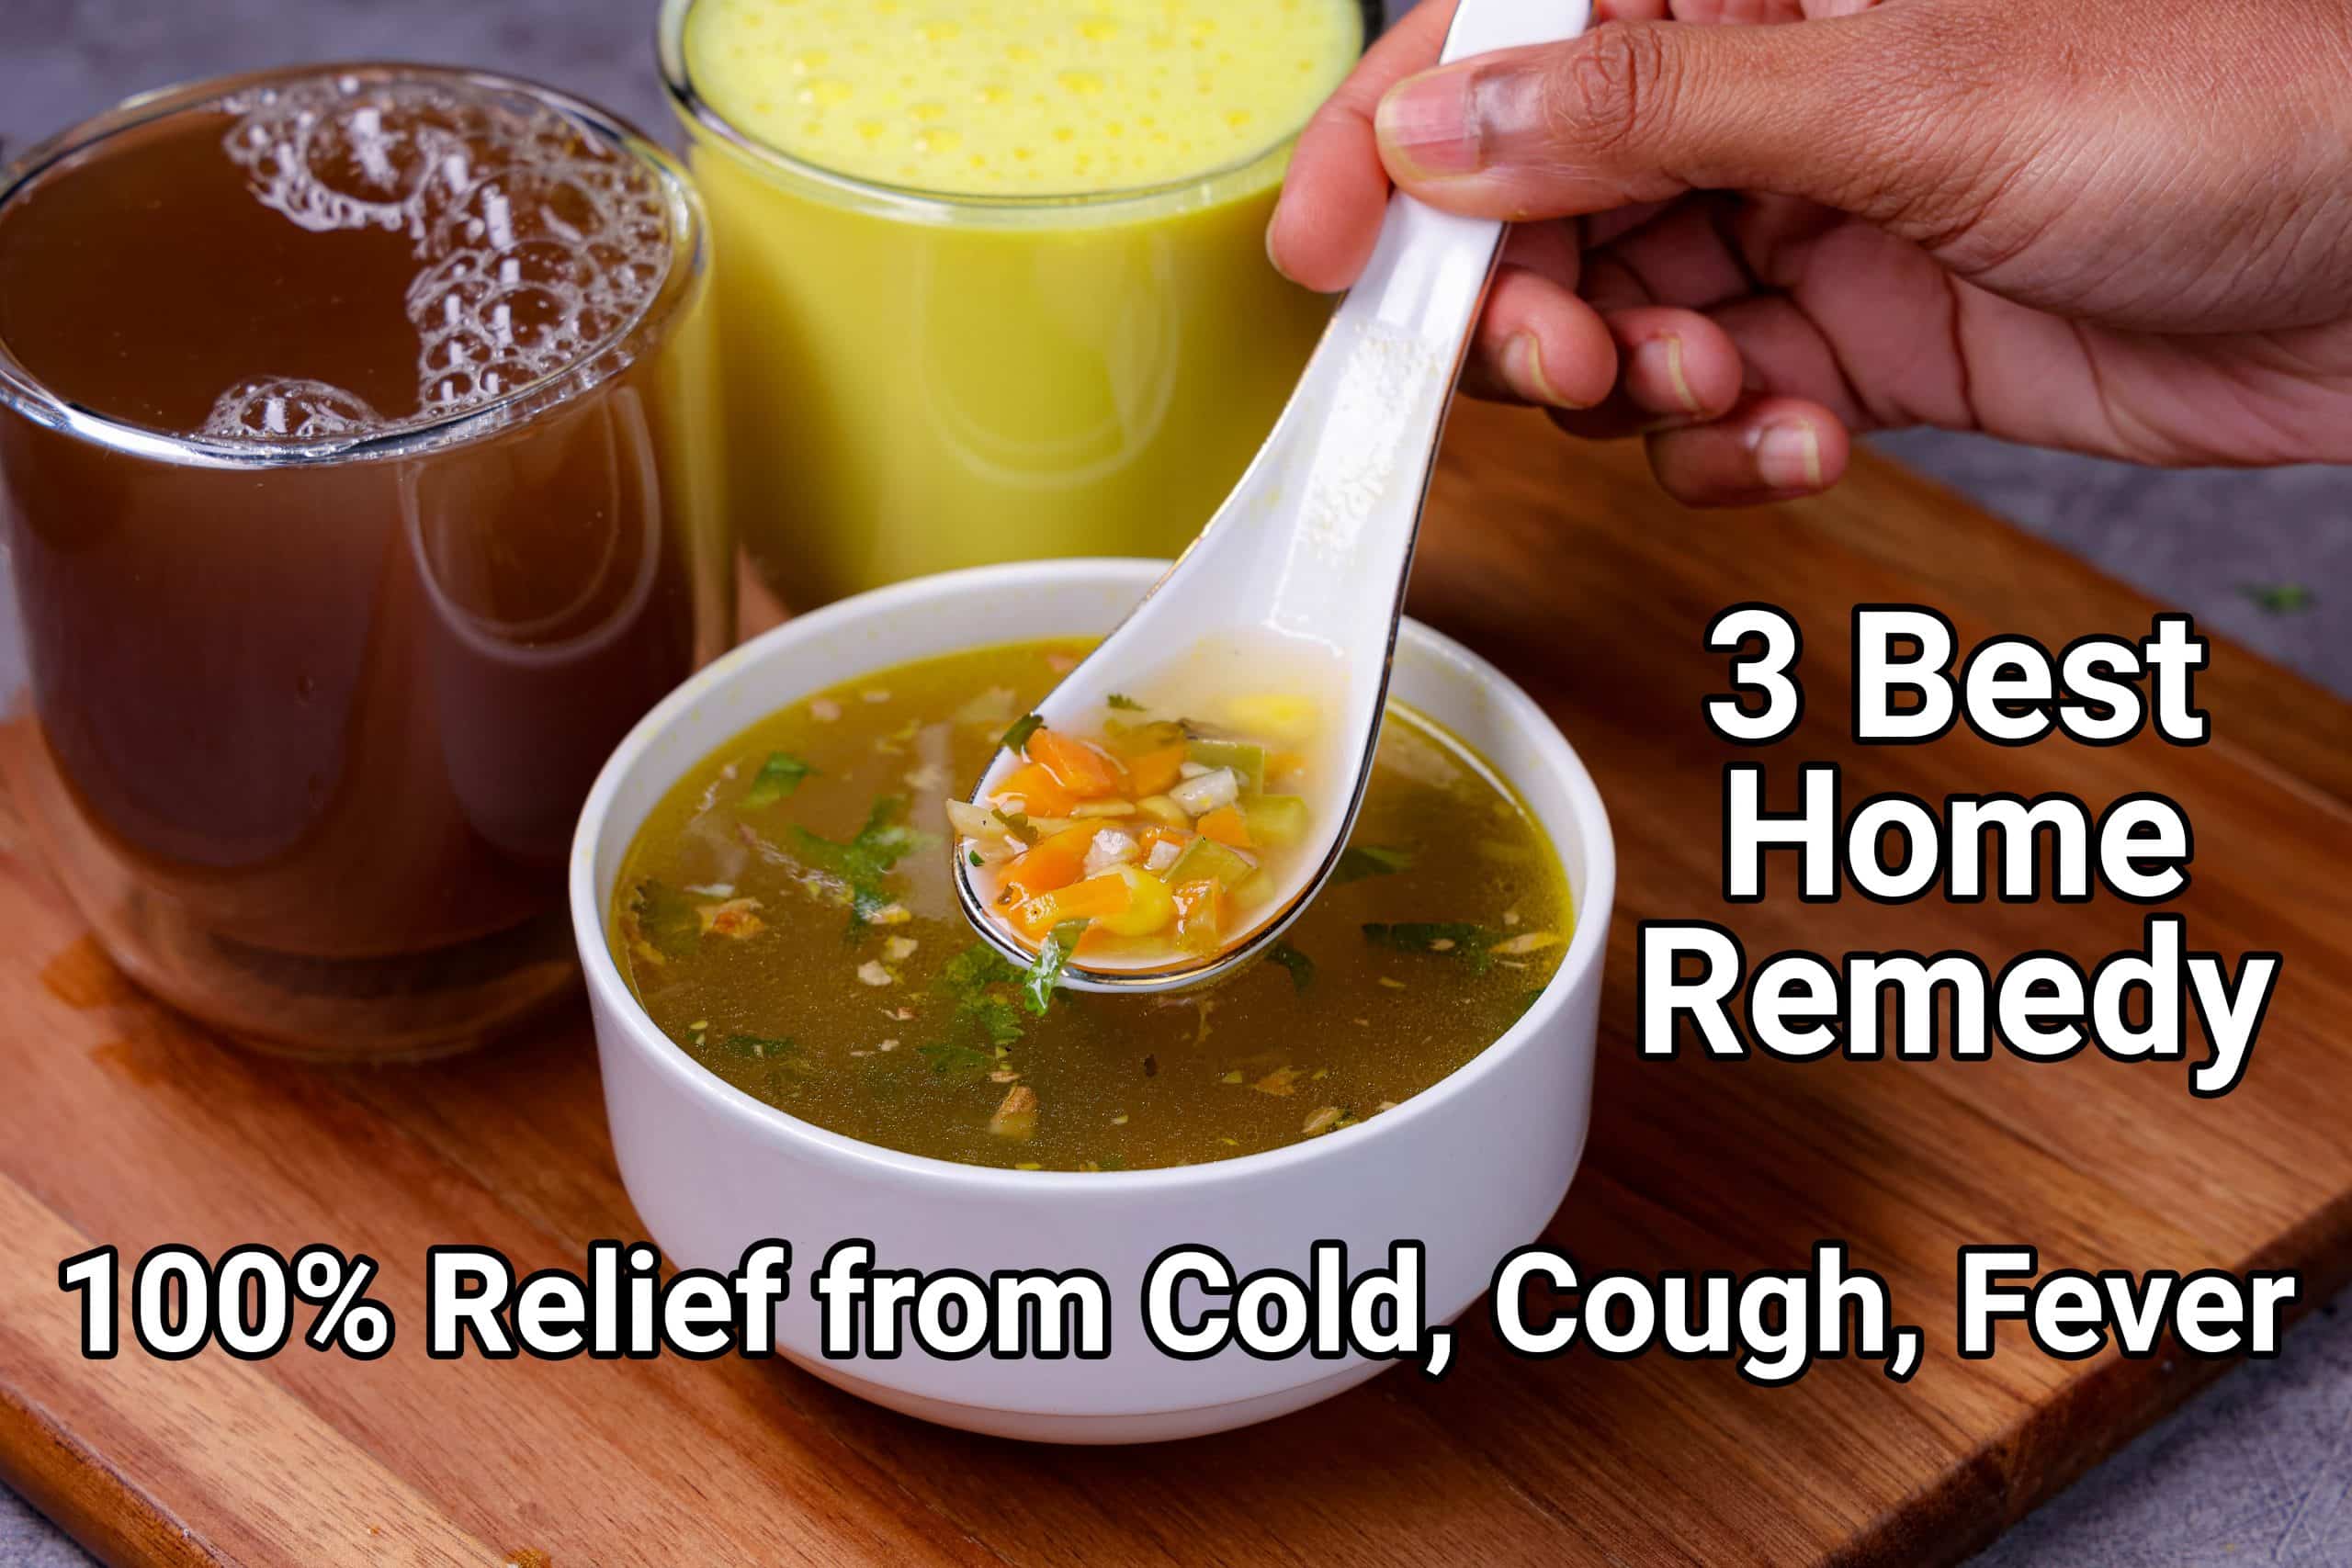 Home Remedy For Flu Best Natural Home Remedies For Cold And Flu